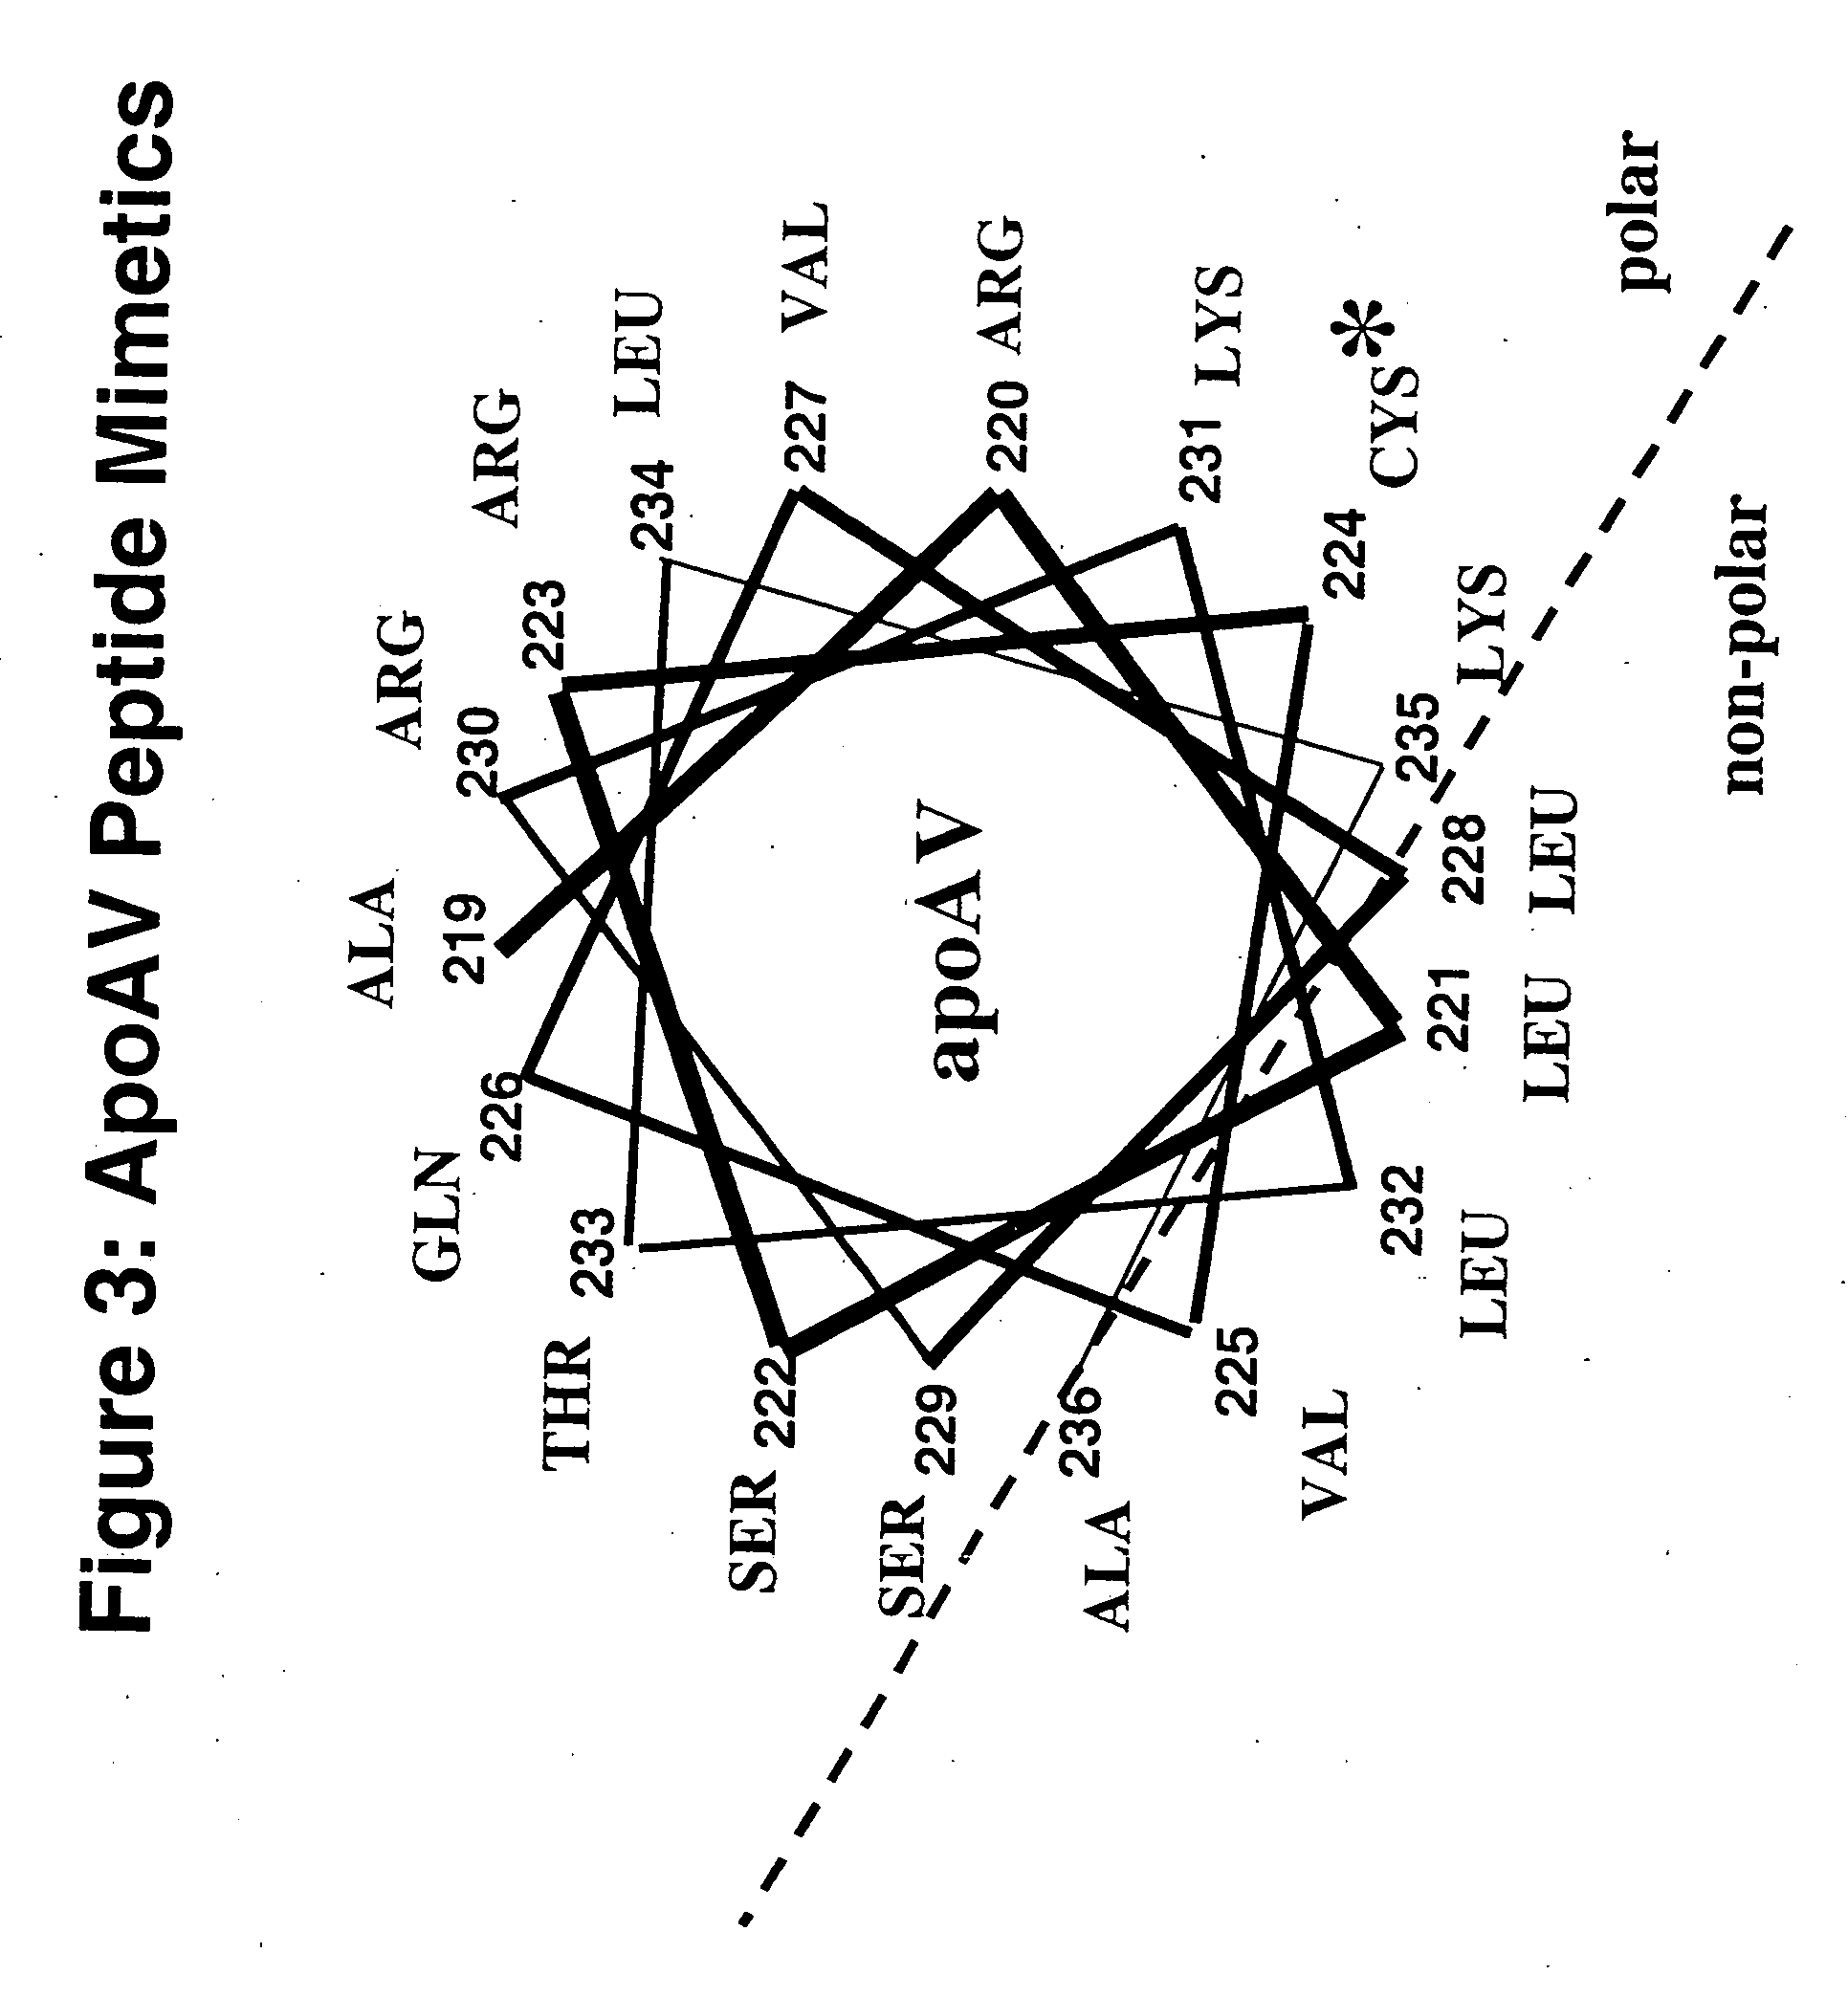 Cysteine-containing peptides having antioxidant properties